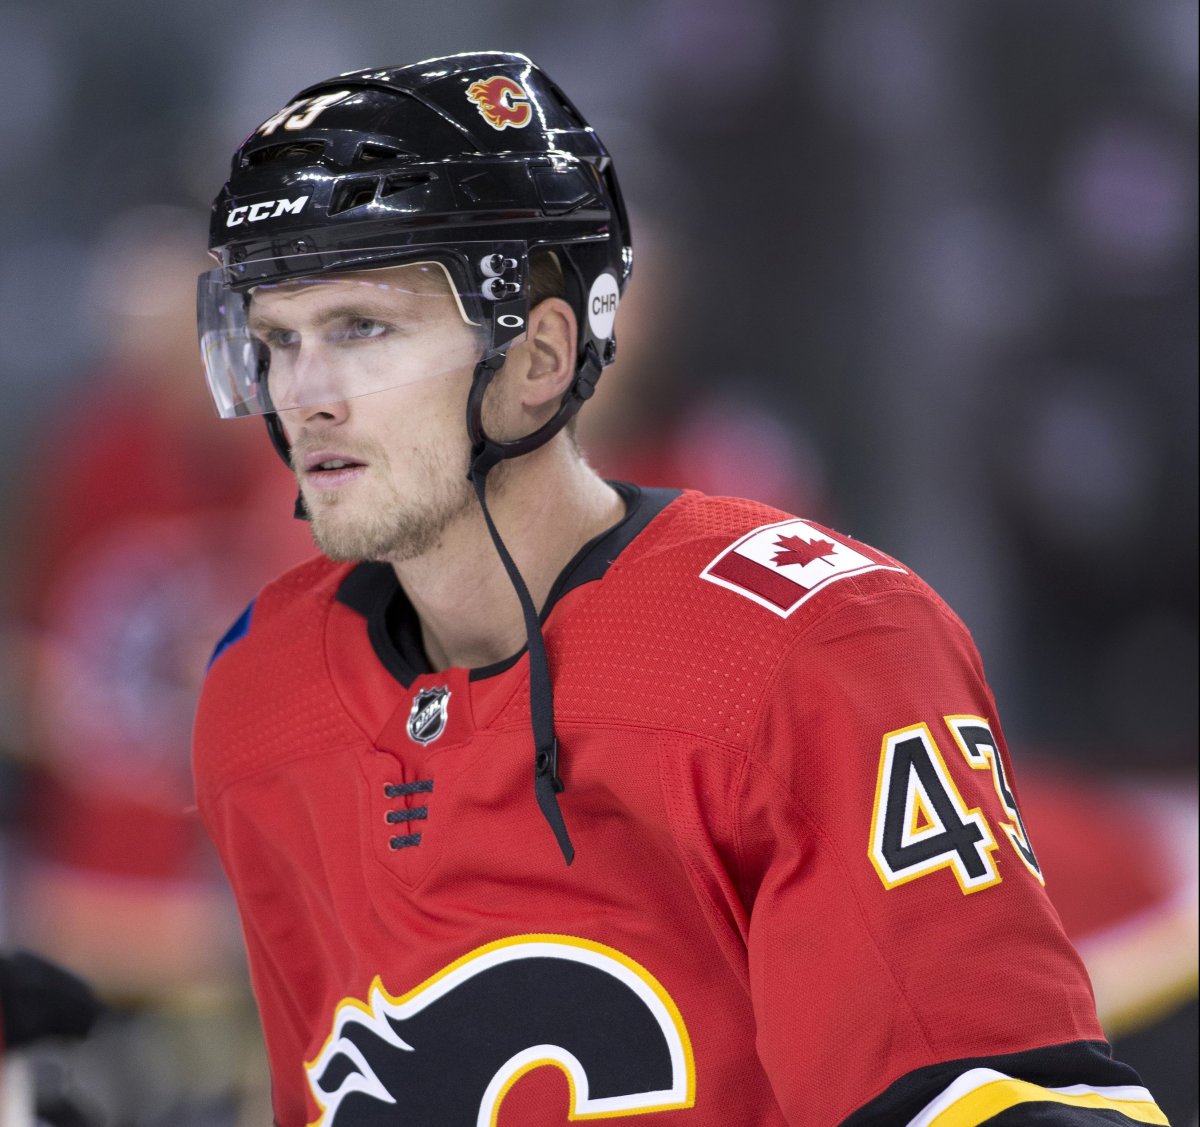 NHL player profile photo on Calgary Flames player Justin Falk during a game against the San Jose Sharks in Calgary, Ab. on Tues., Sept. 25, 2018.  The 30-year-old defenceman signed a one-year, two-way deal with the Ottawa Senators on Friday.